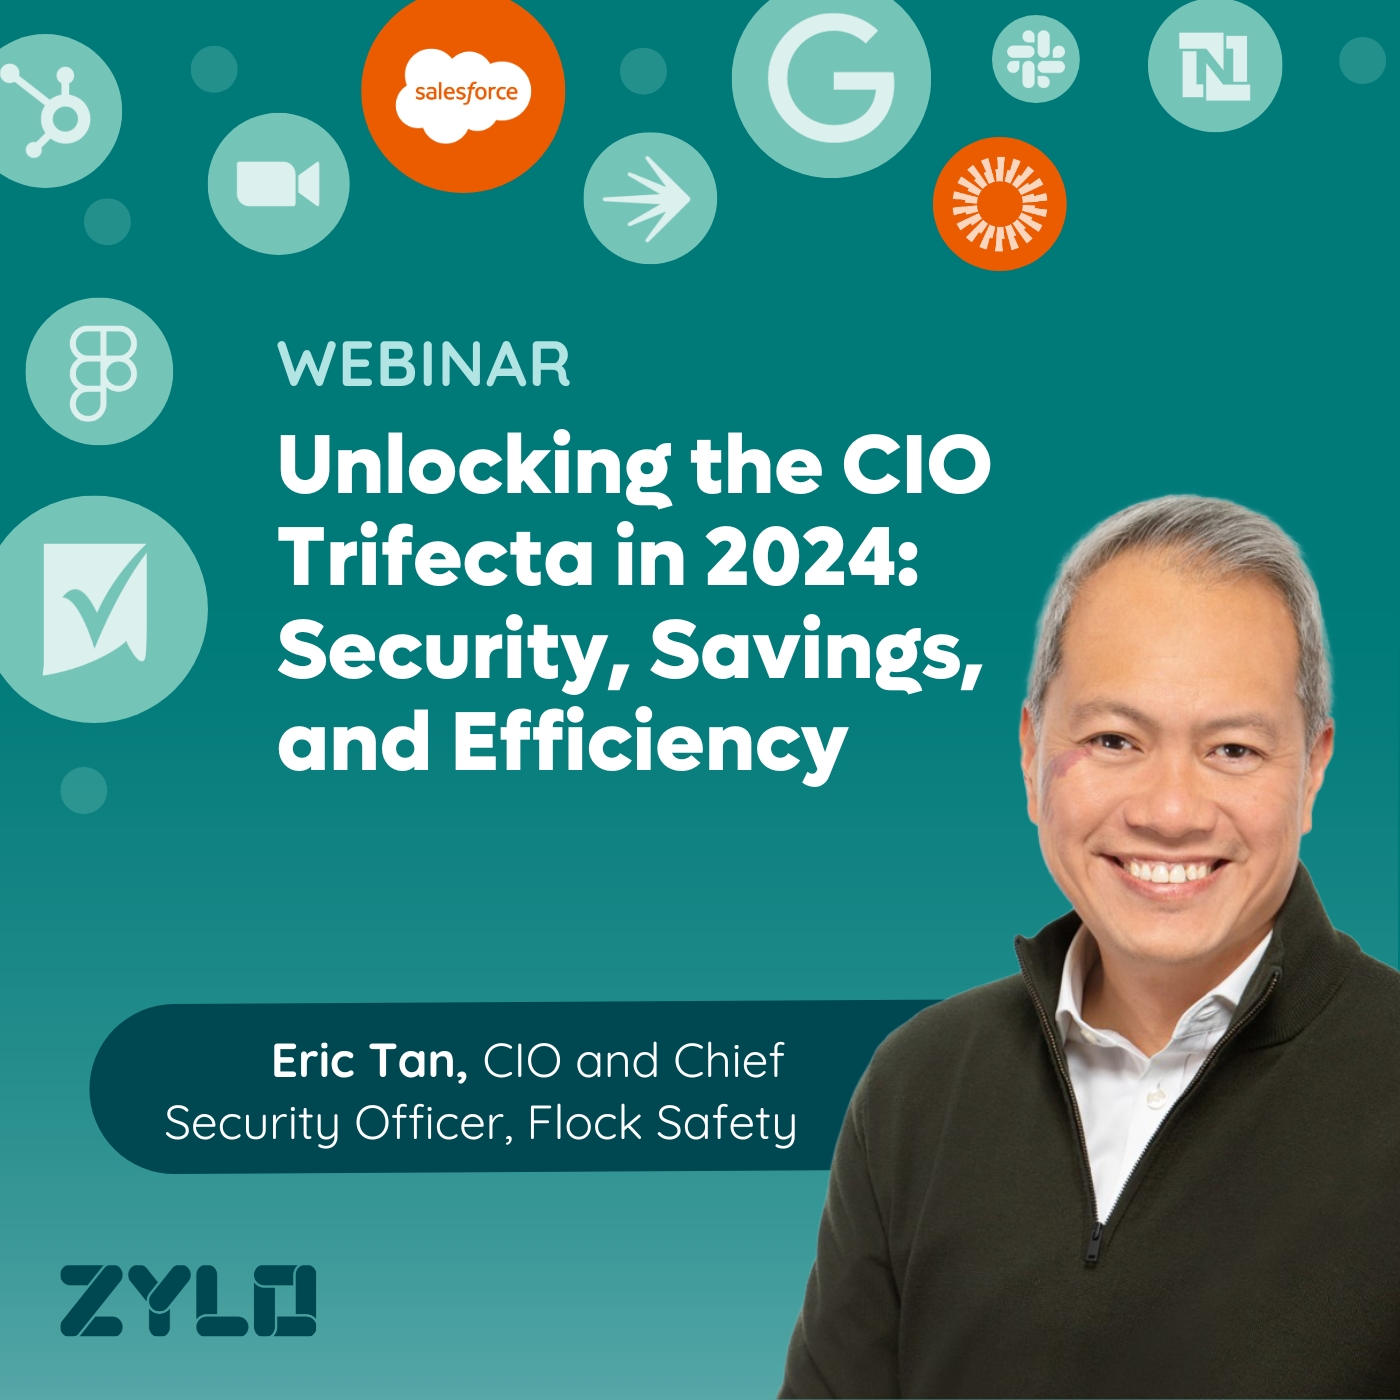 Unlocking the CIO Trifecta in 2024: Security, Savings, and Efficiency